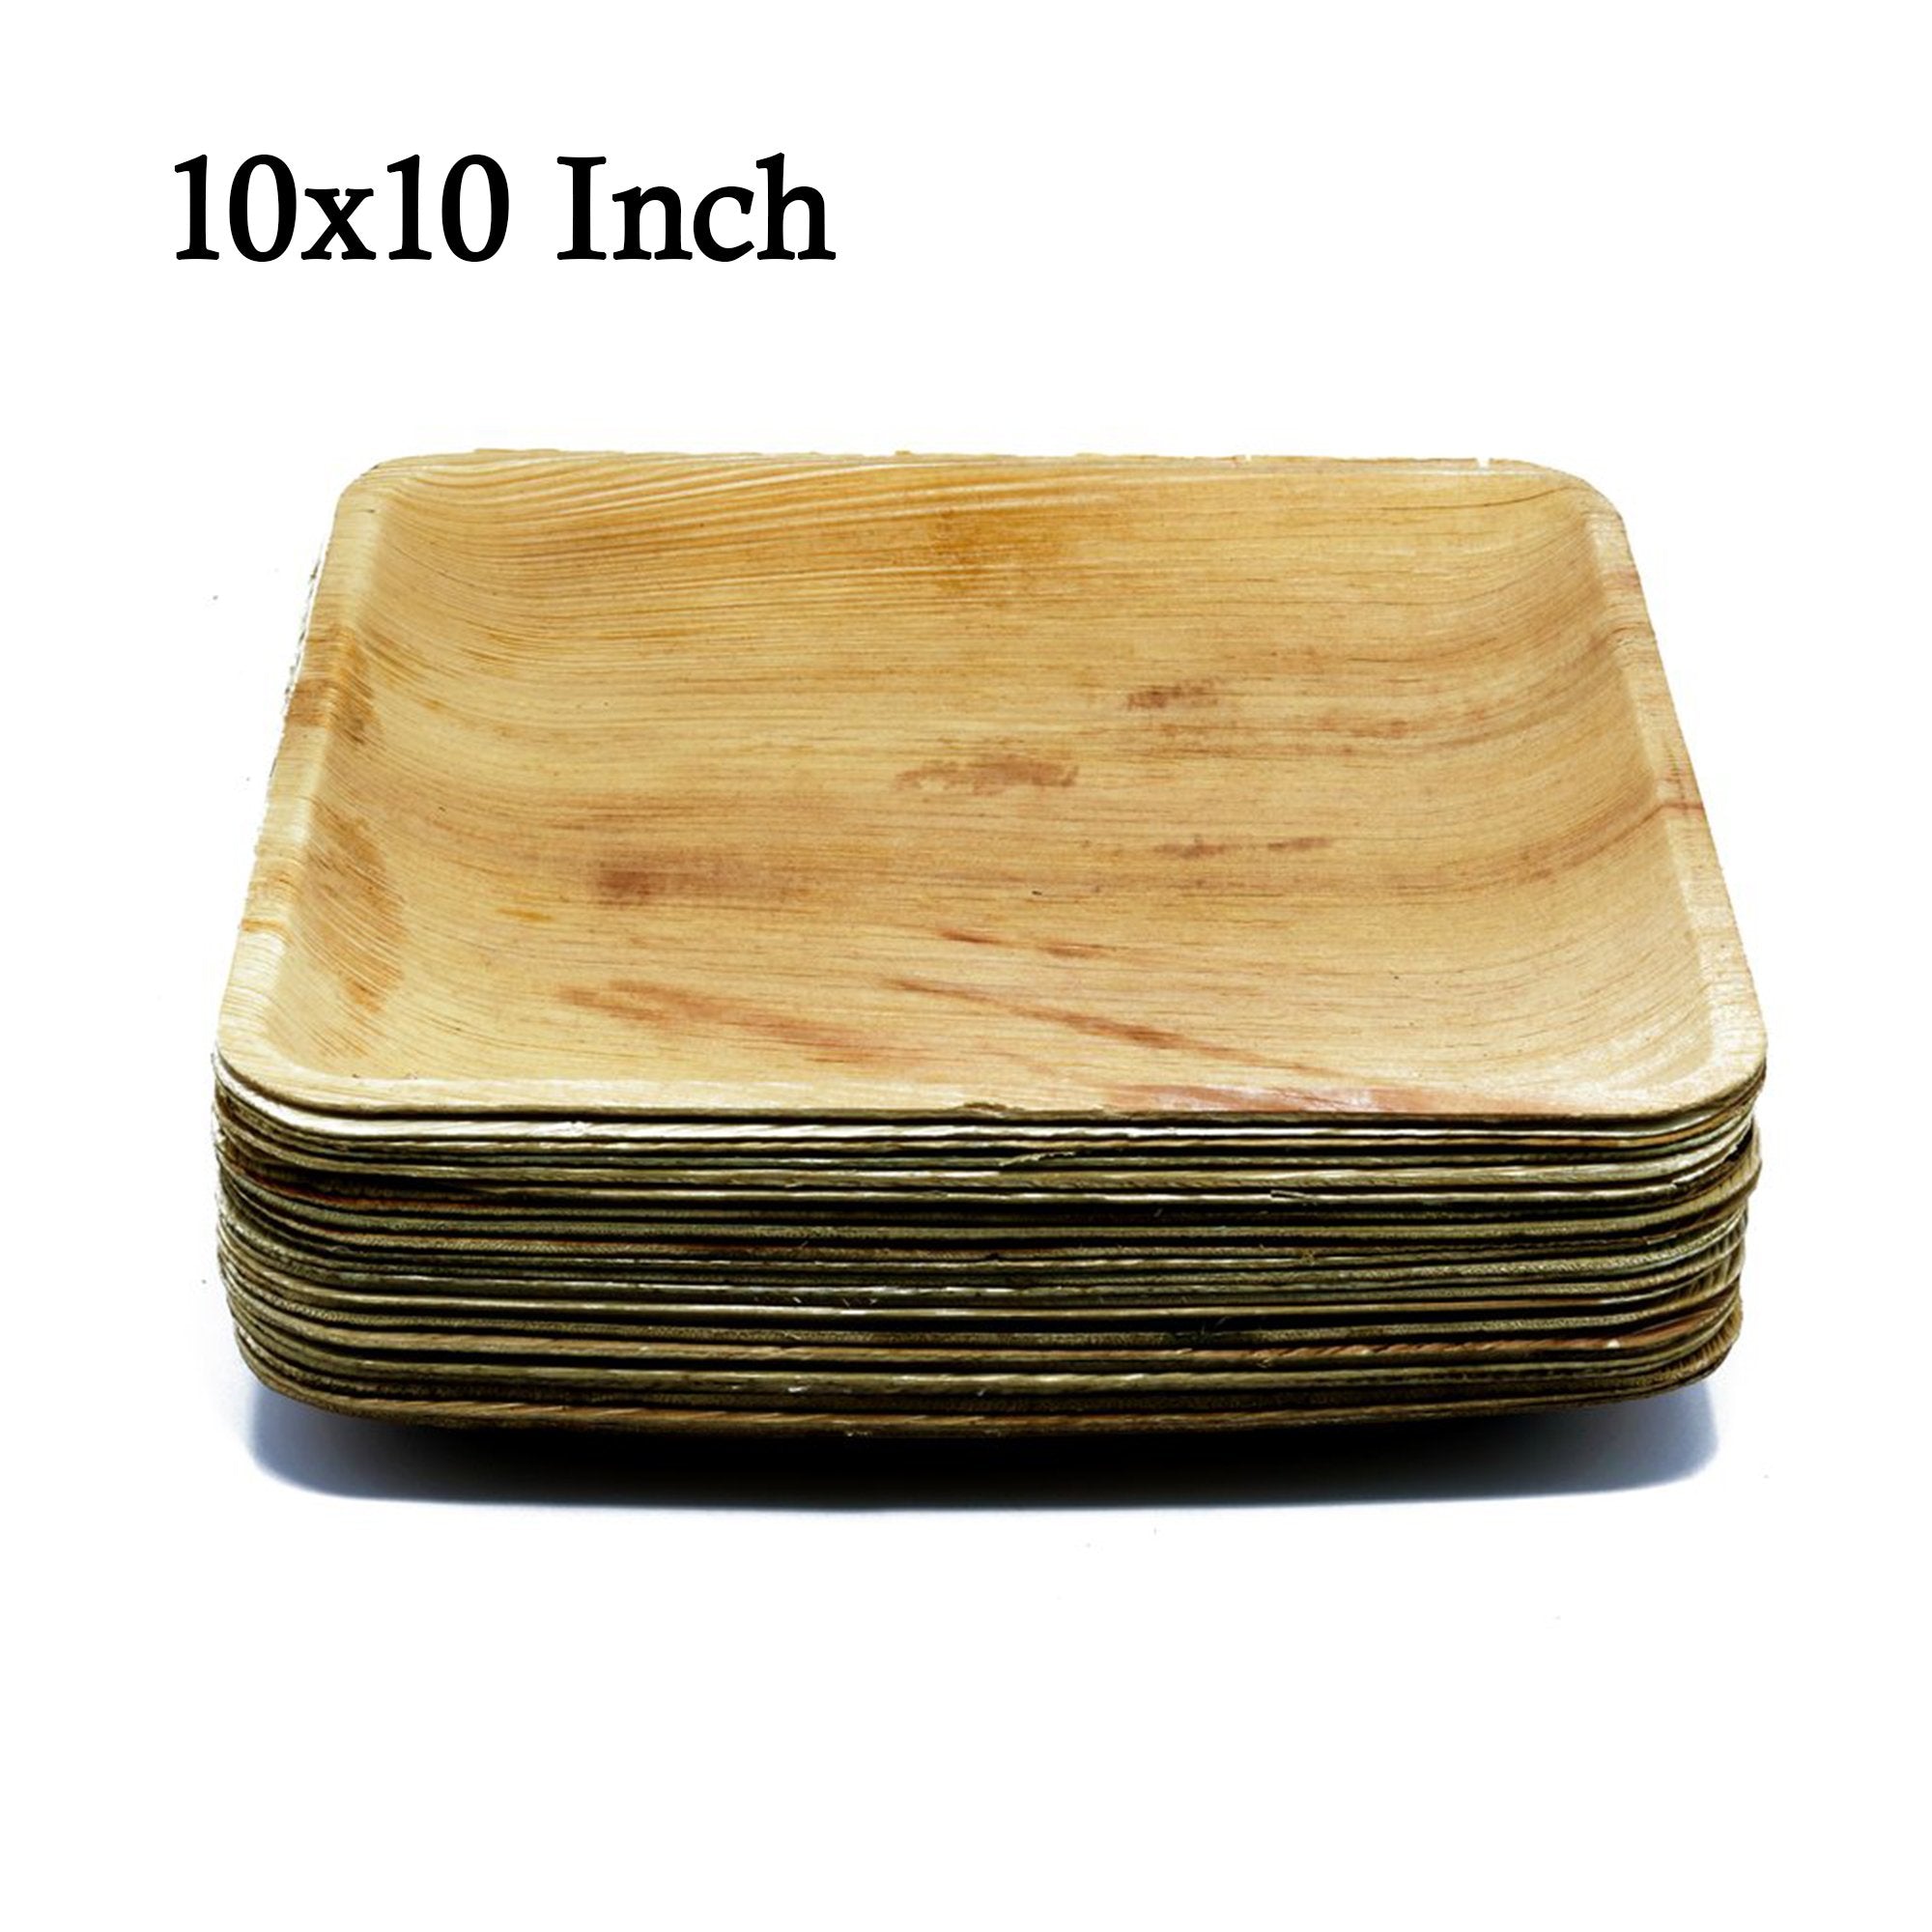 3214 Disposable Square Eco-friendly Areca Palm Leaf Plate (10x10 inch) (pack of 25) - SkyShopy